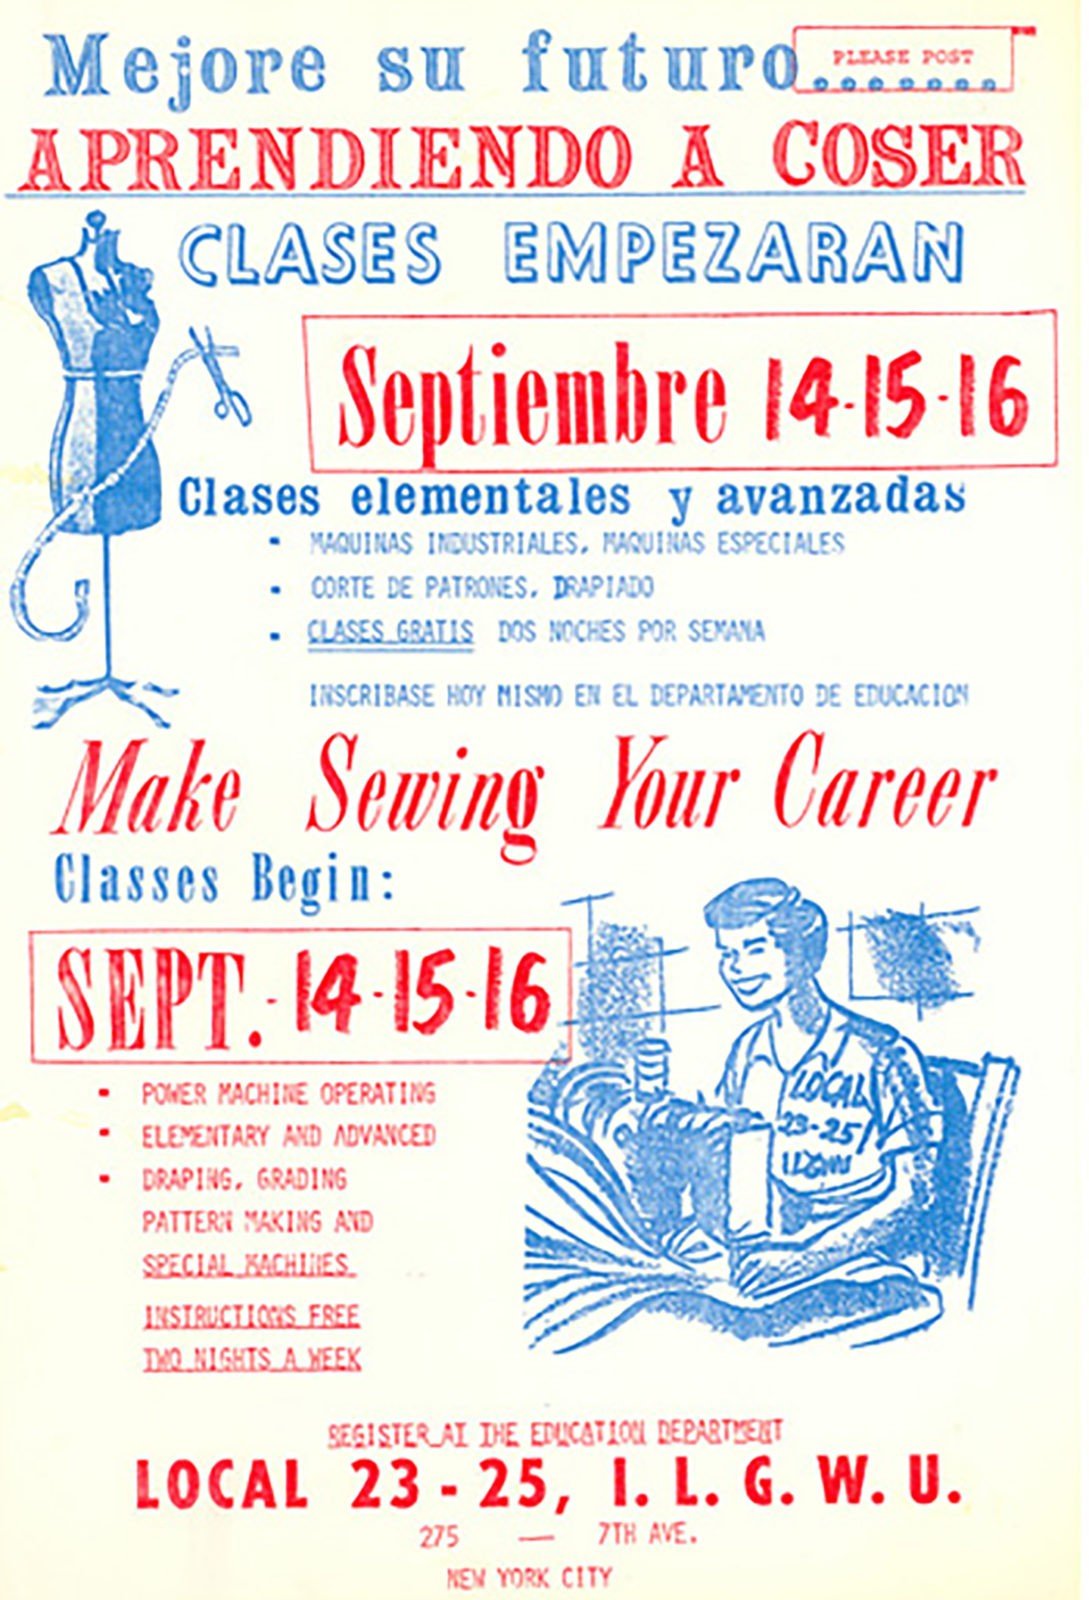 International Ladies Garment Workers Union poster in English and Spanish advertising weekly beginner and advanced sewing classes